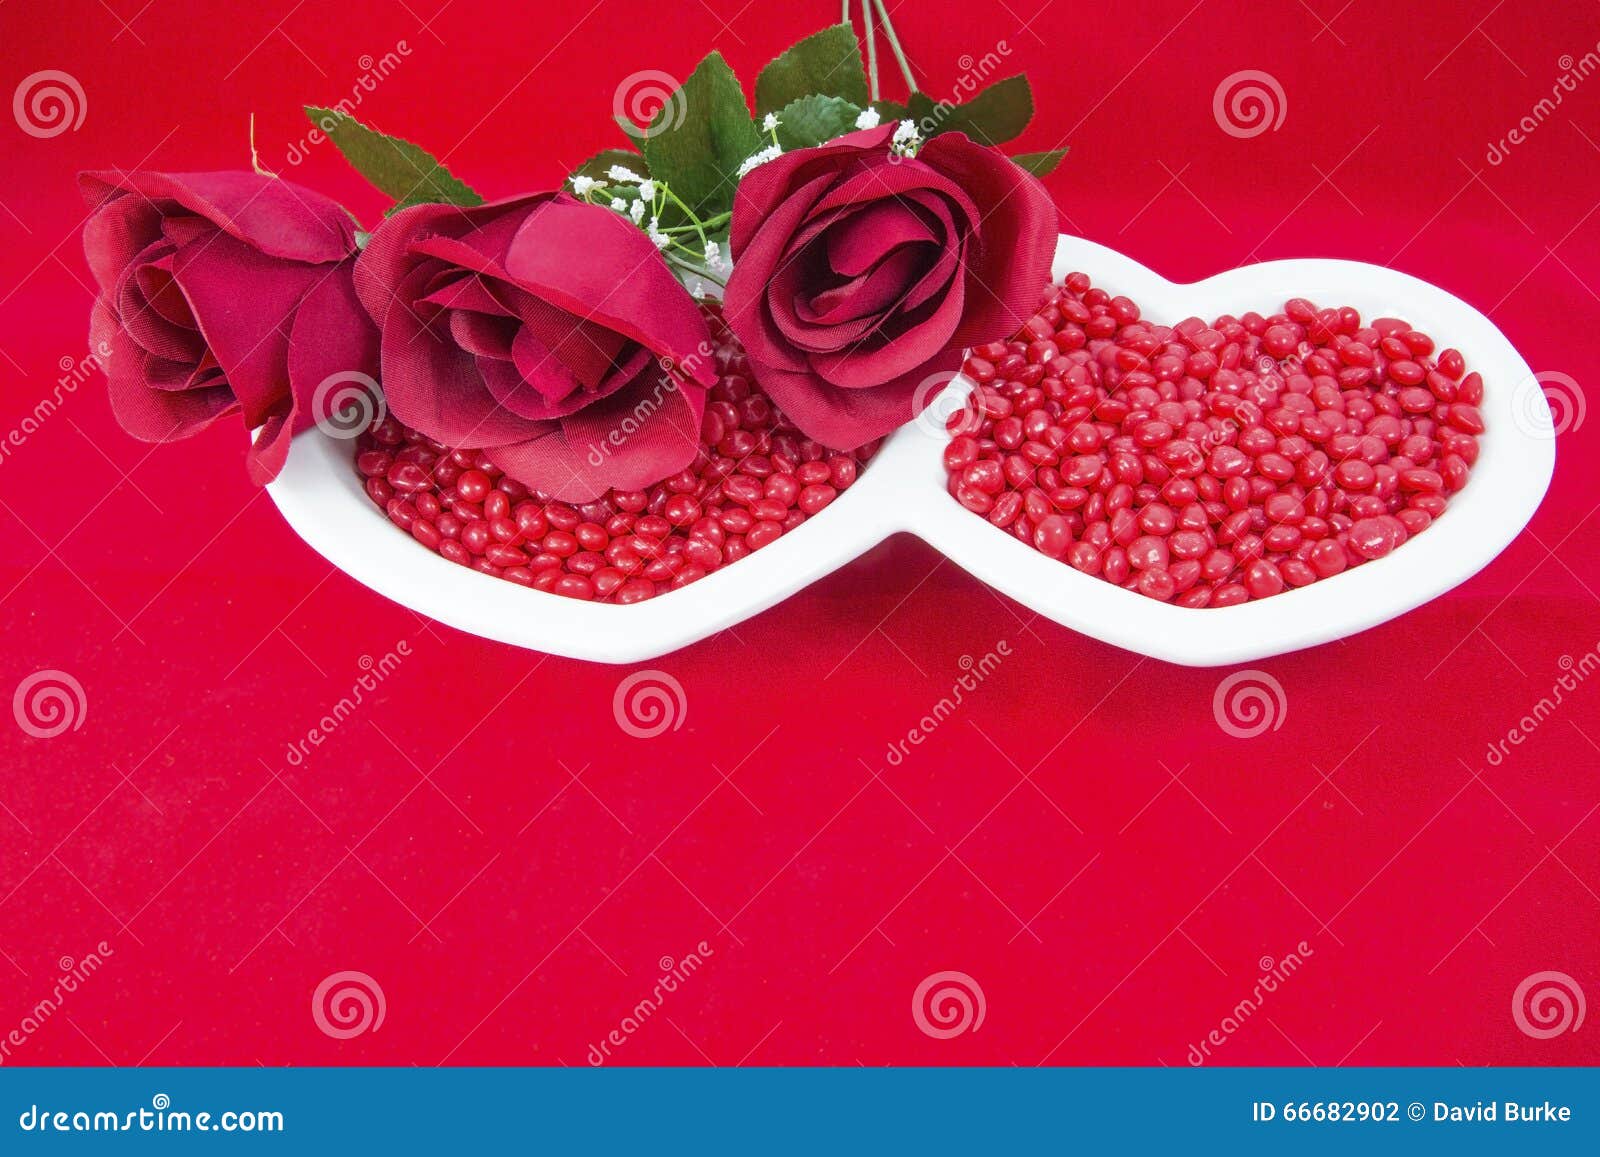 valentine card roses red candy heart dish love concept